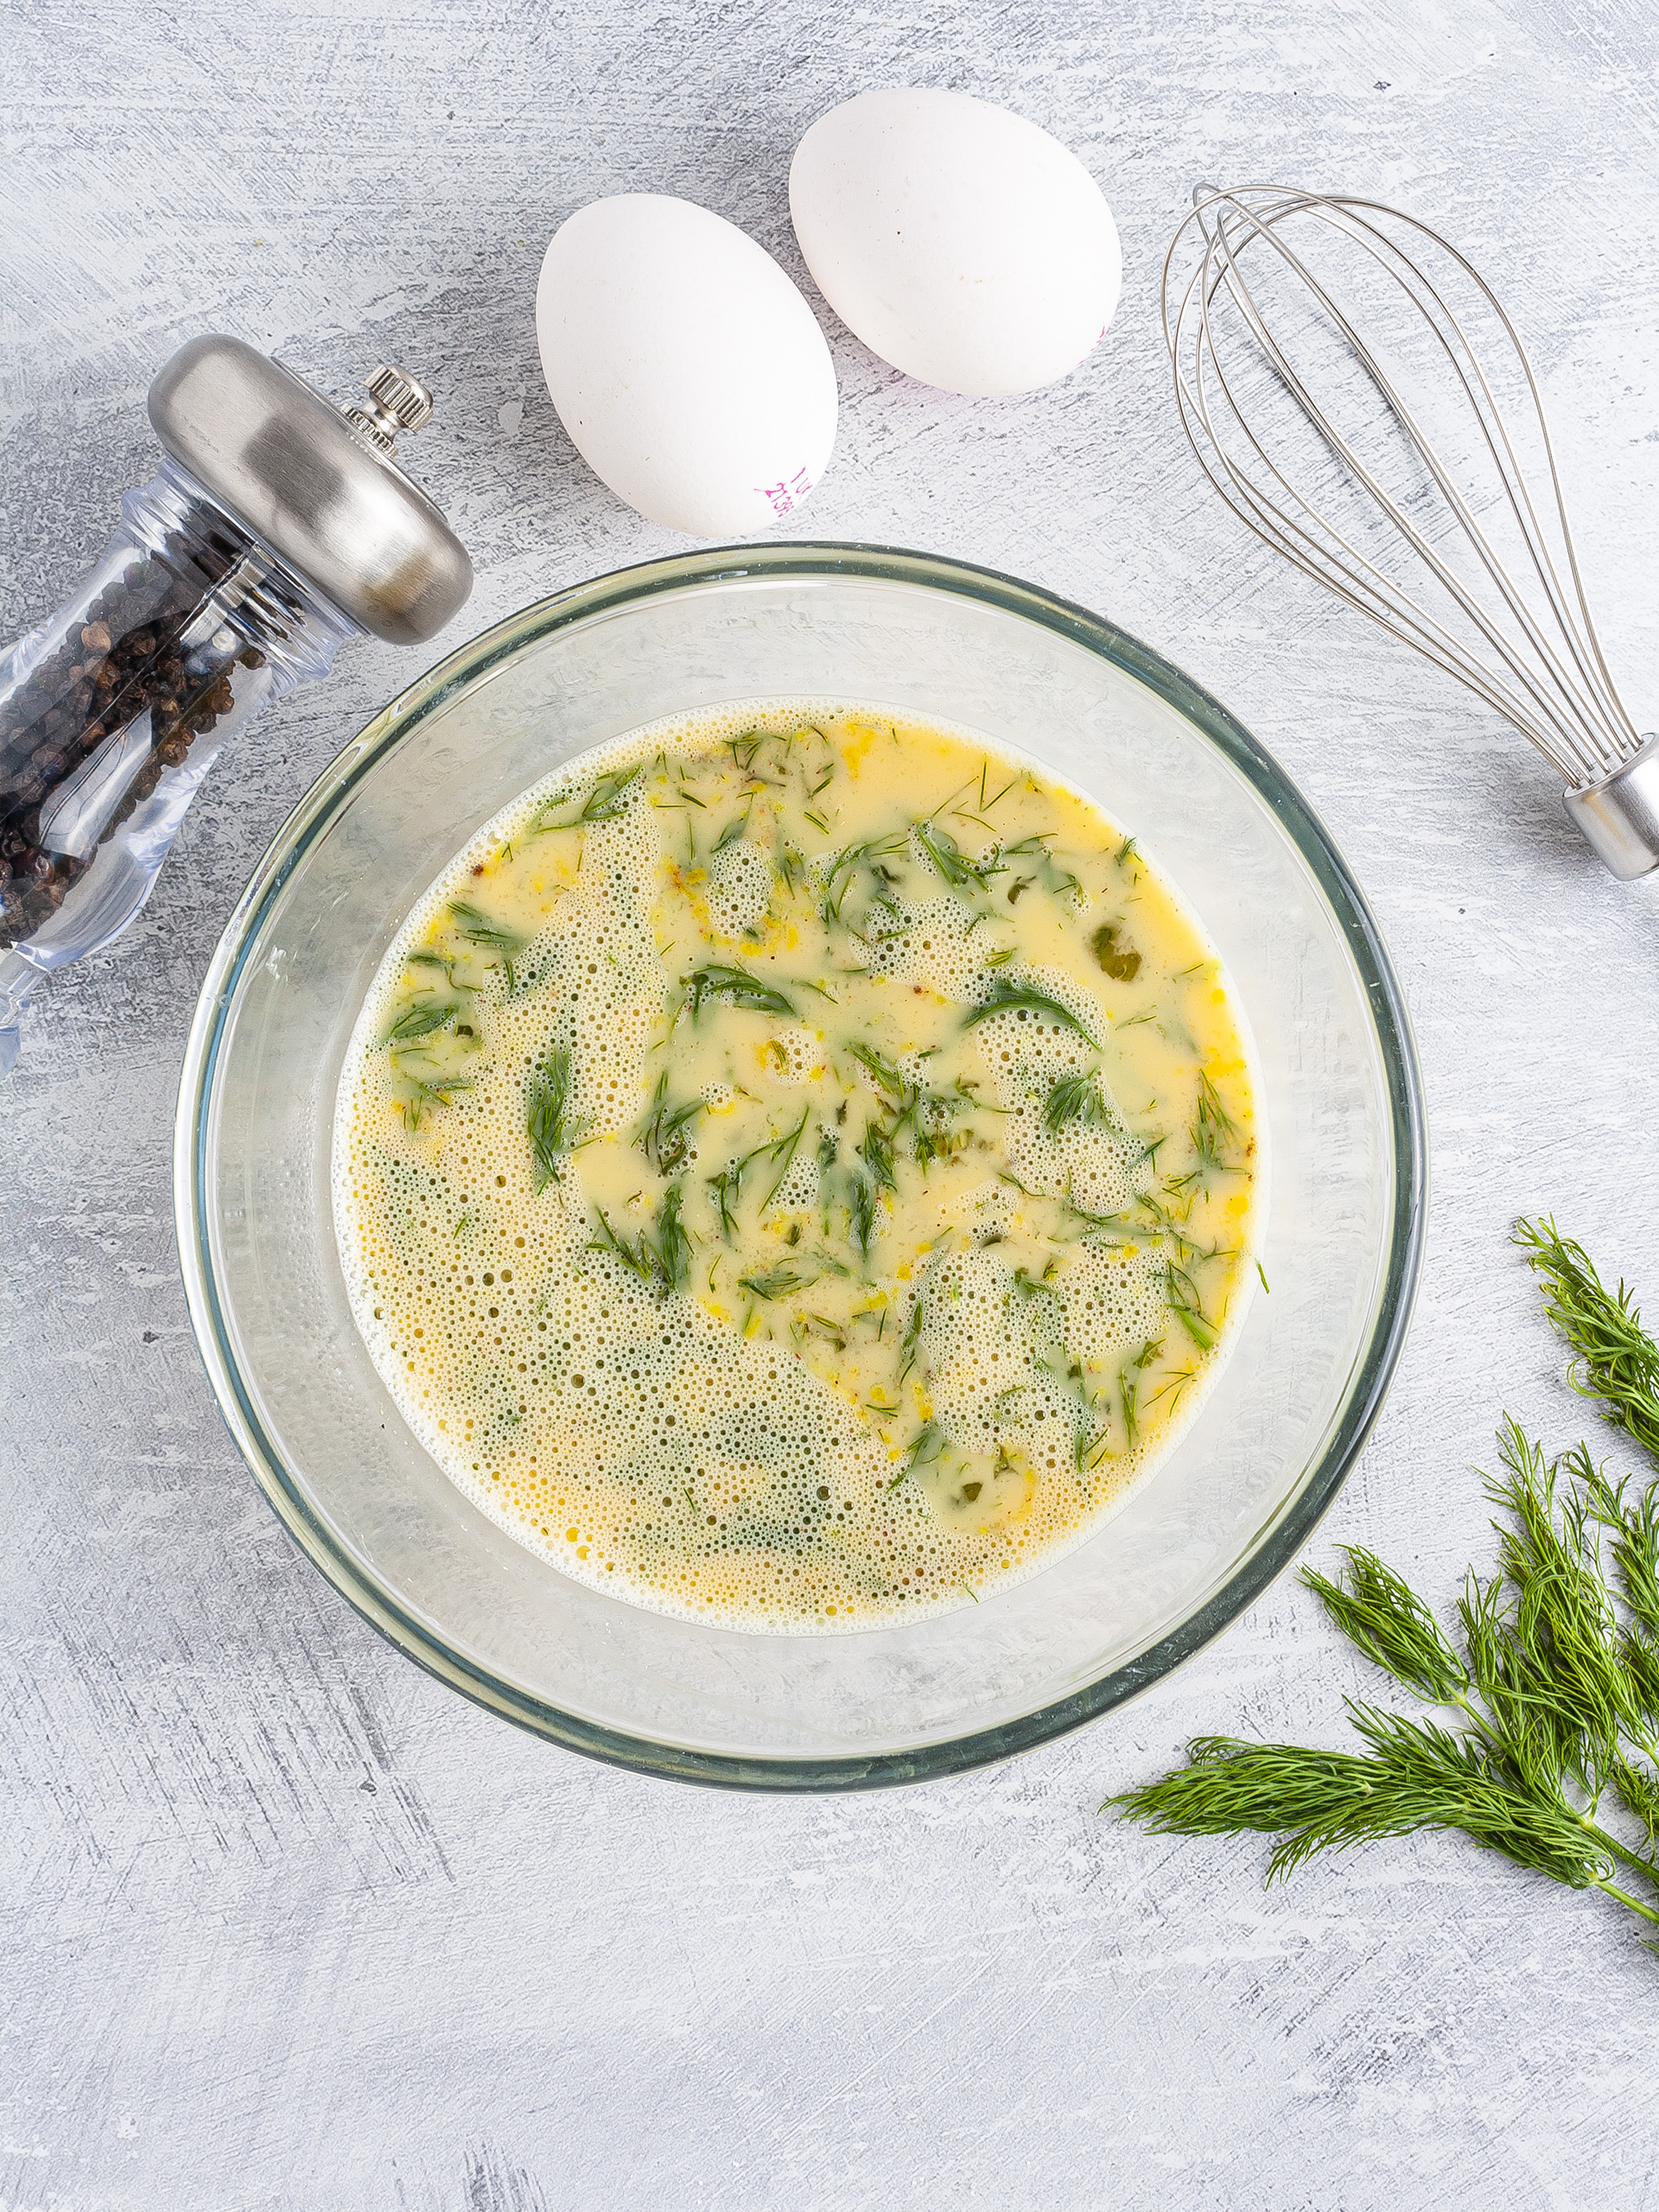 Beaten eggs with dill